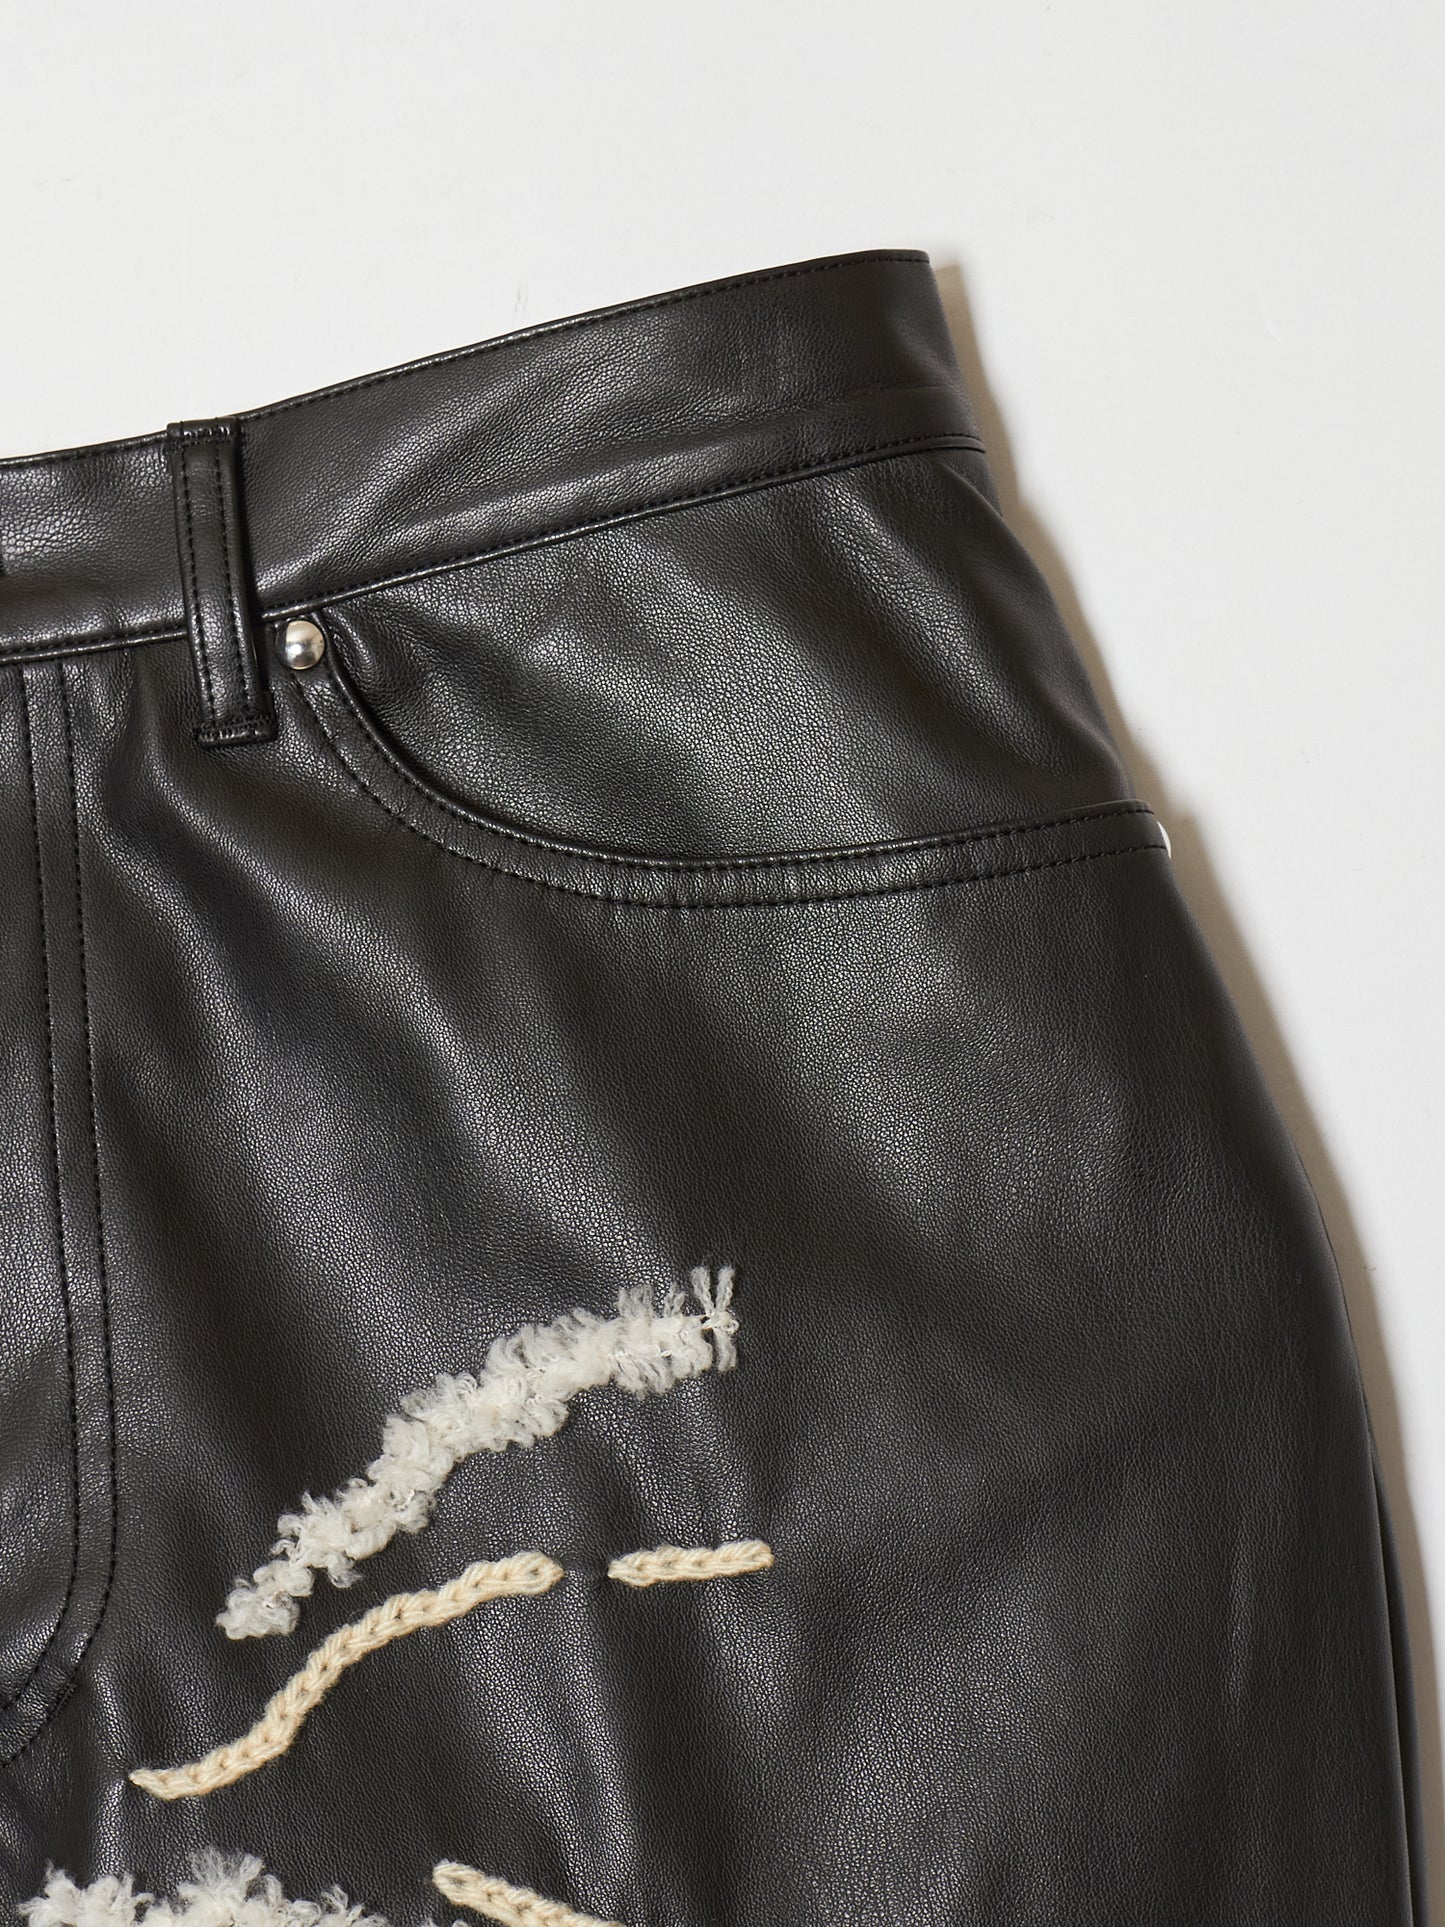 wrinkle stitch faux leather pants【Delivery in December】